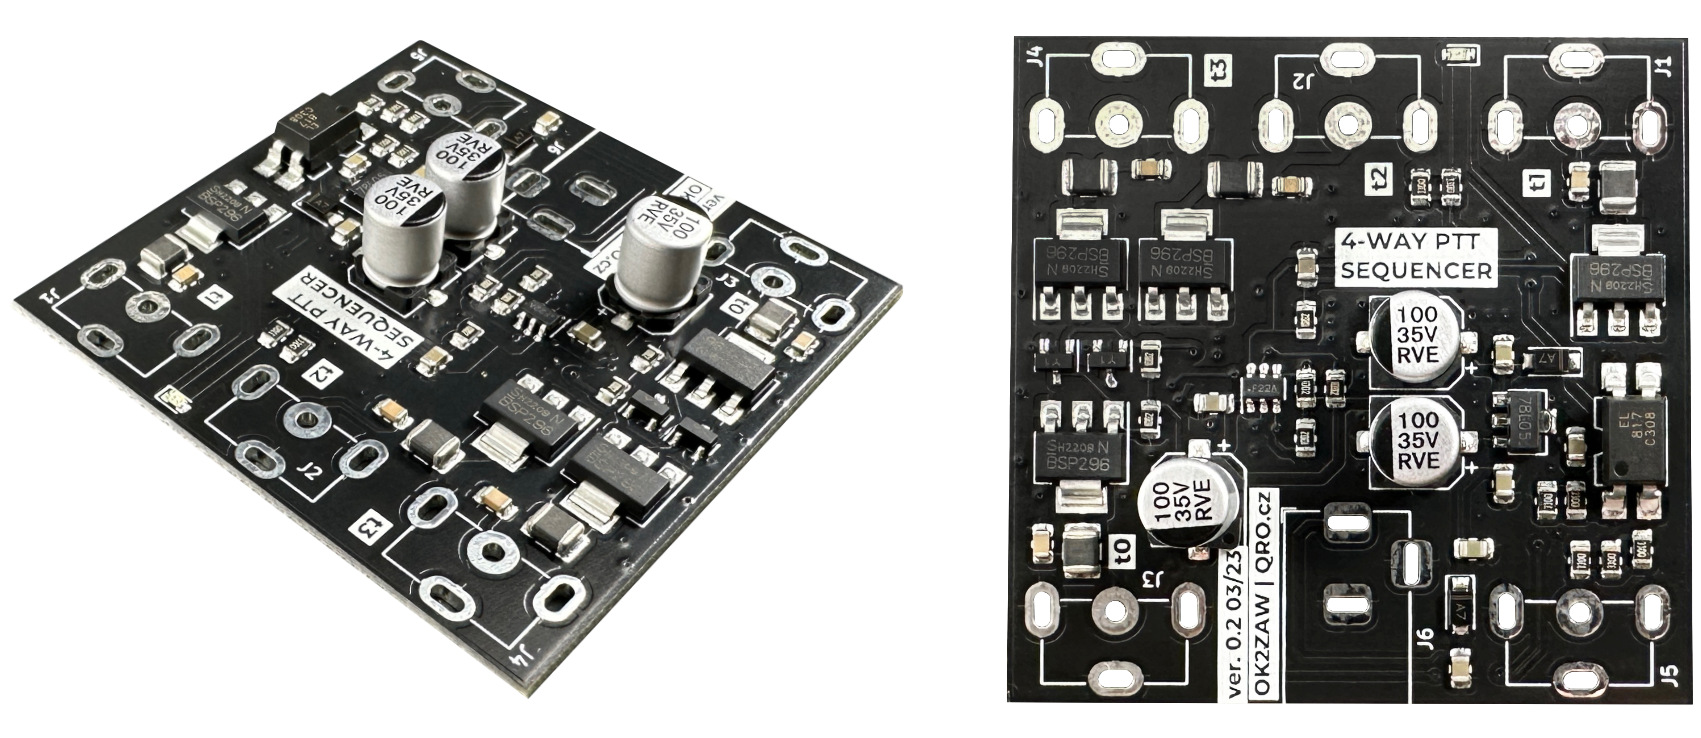 4-way ptt sequencer assembled board by qro.cz hamparts.shop